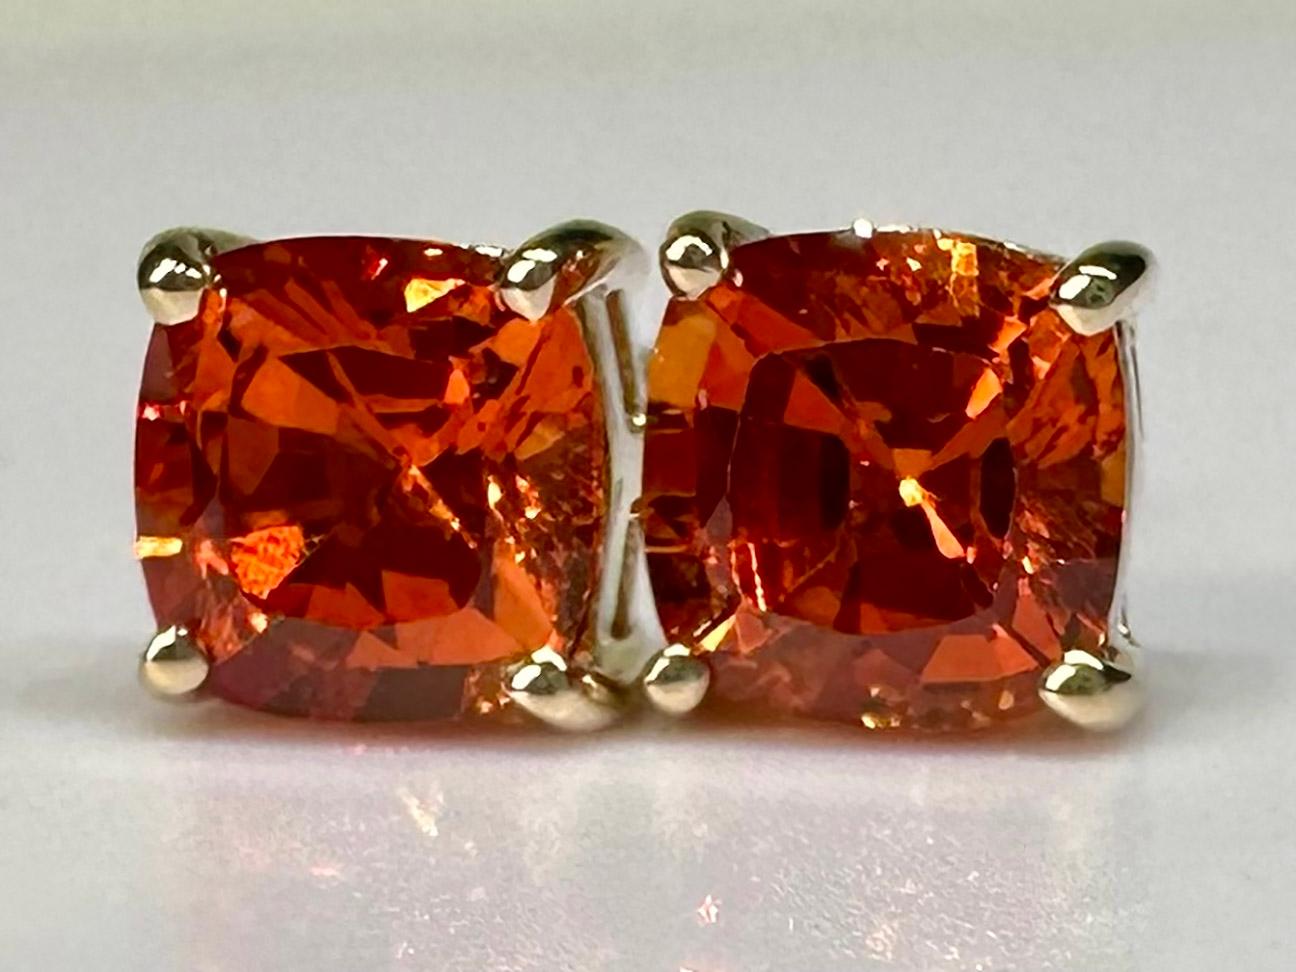 An important pair of 14kt Yellow Gold Stud Earrings with Cushion Cut Orange Sapphires. 

Originally from San Diego, California, Kary Adam lived in the “Gem Capital of the World” - Bangkok, Thailand. He frequently makes trips there sourcing local